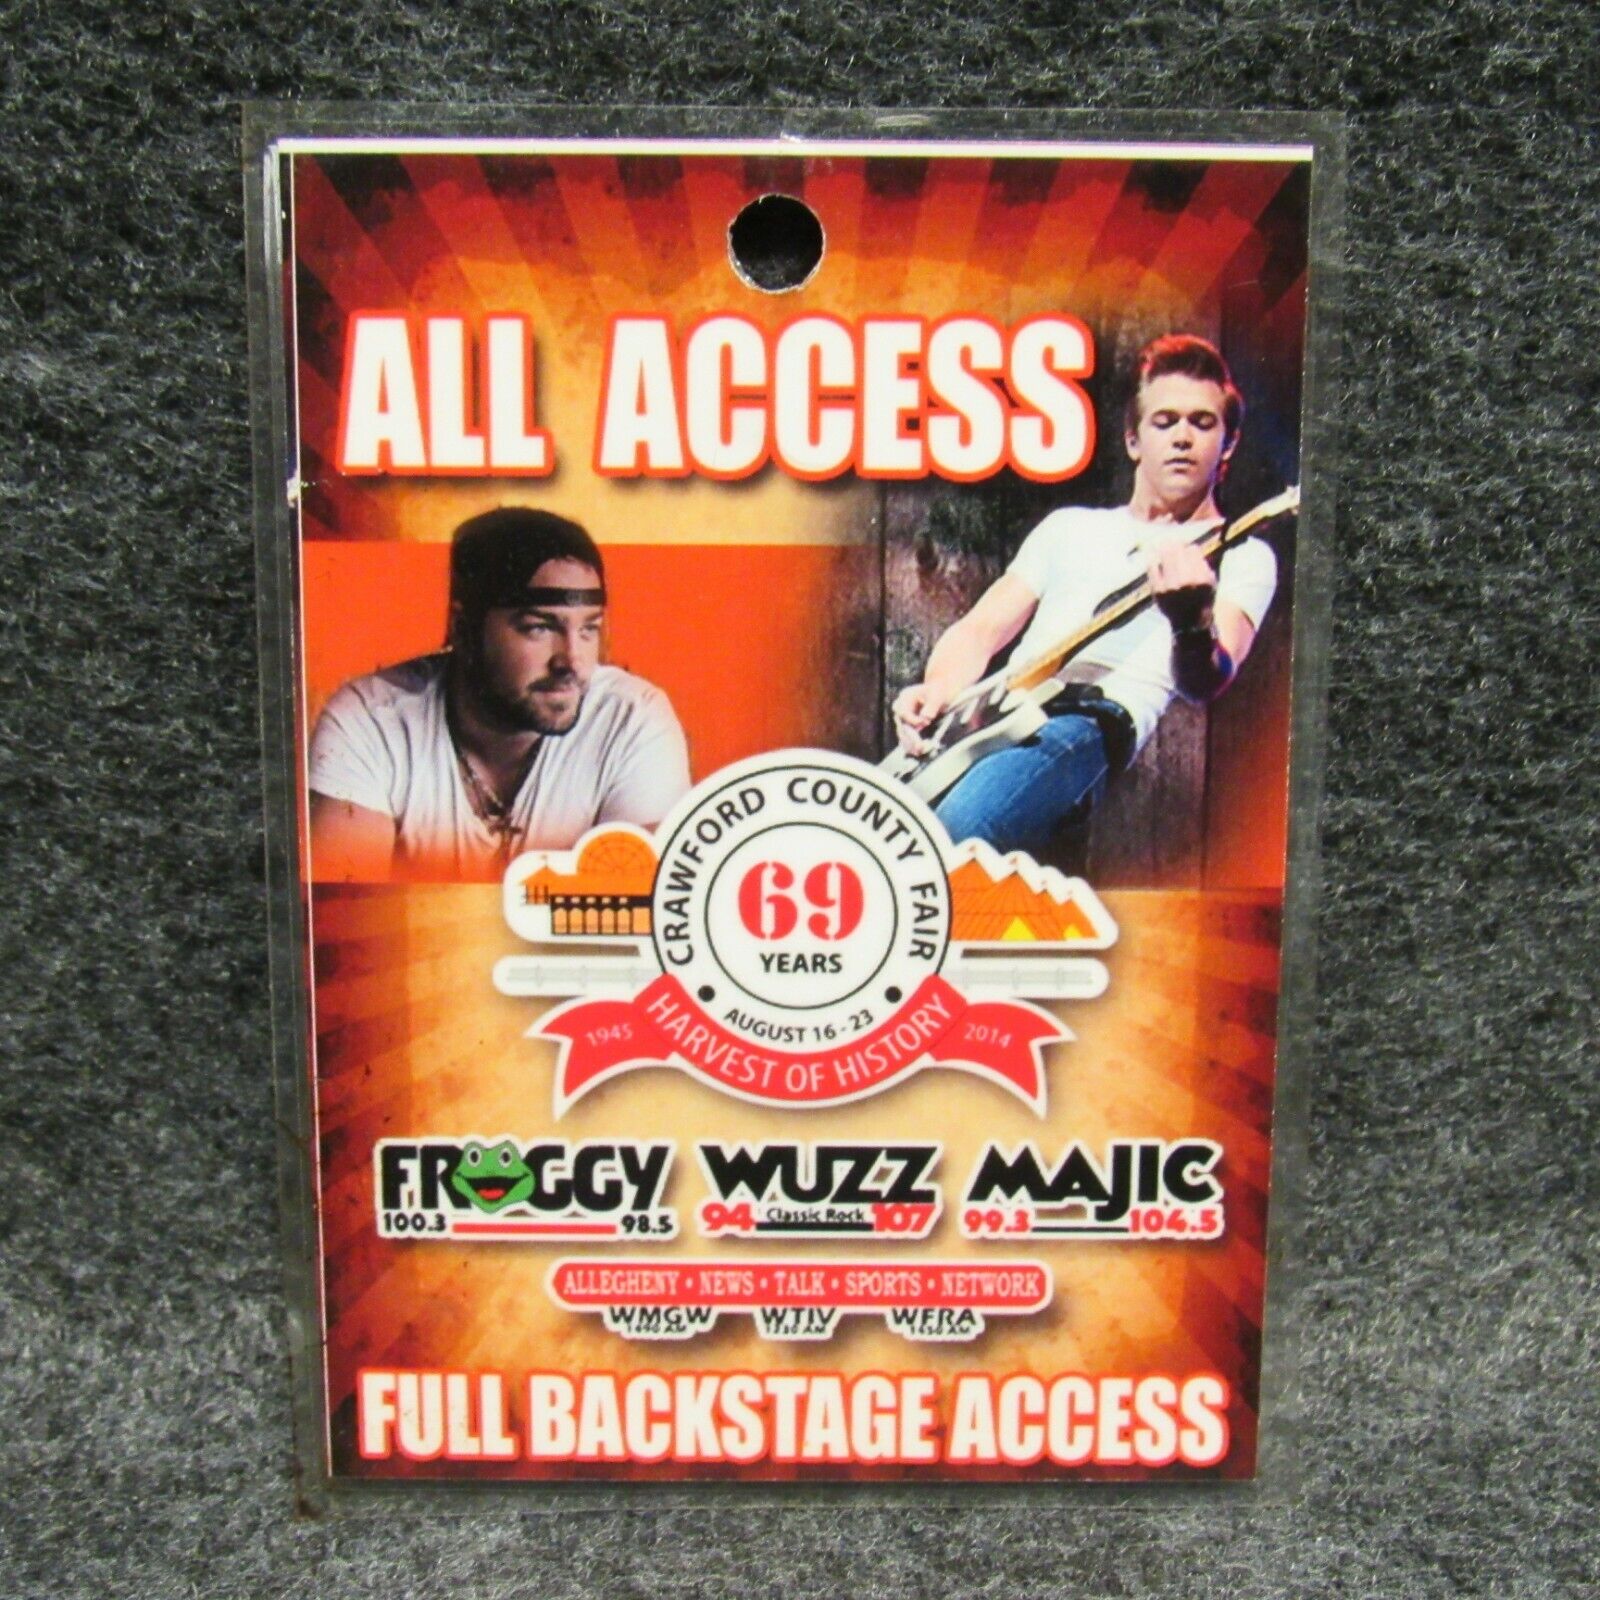 69th Crawford County Fair Full Access Backstage Pass Lee Brice Higbee Froggy Wuz